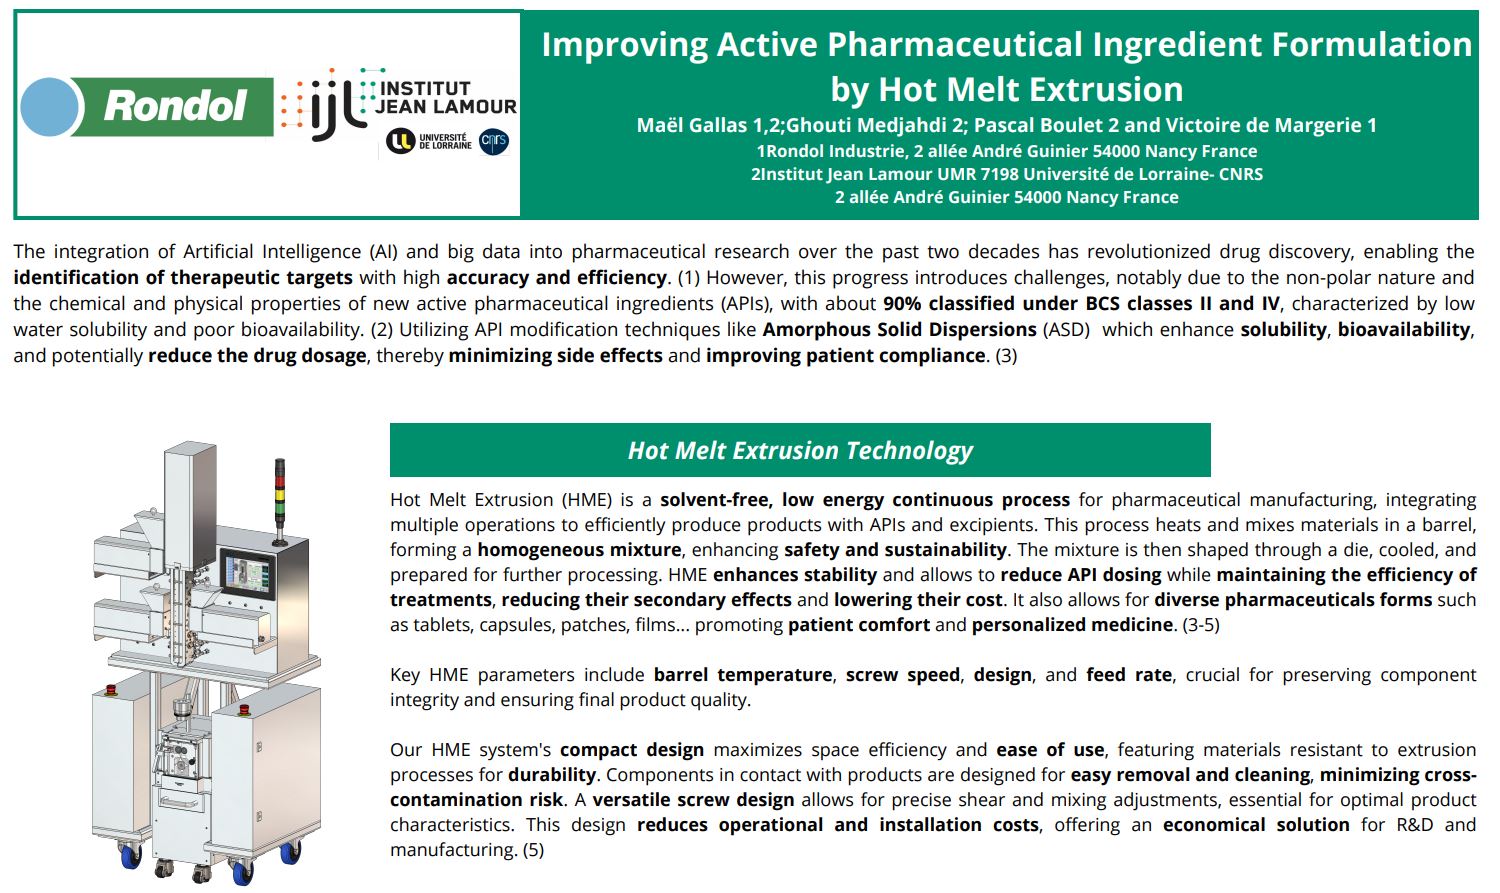 Improving Active Pharmaceutical Ingredient Formulation by Hot Melt Extrusion